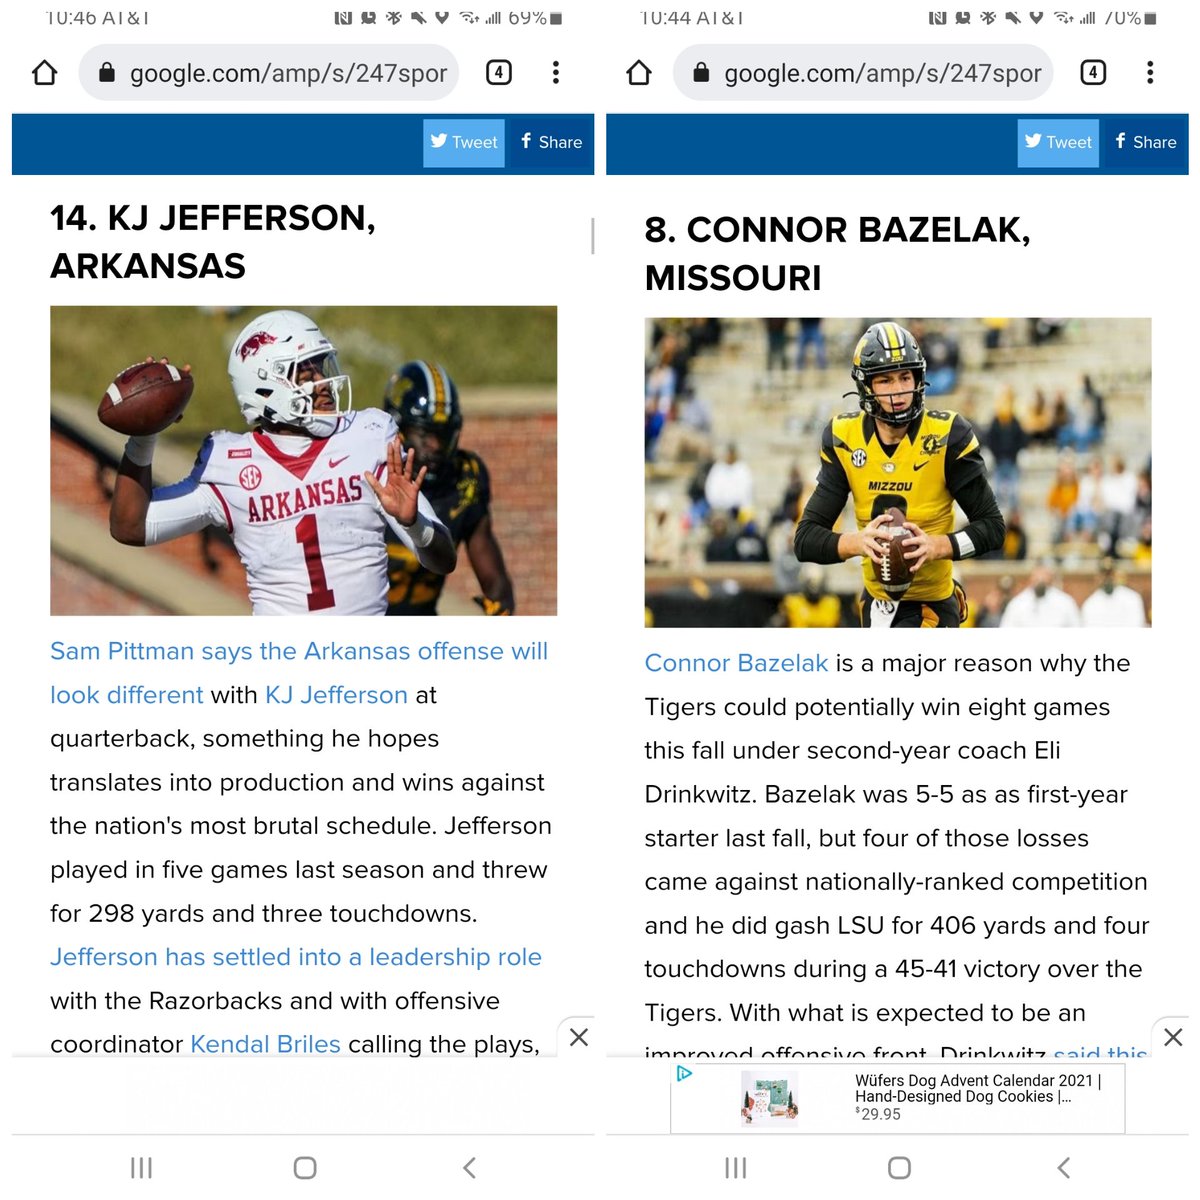 Never forget when @247Sports ranked KJ Jefferson as the worst QB in the SEC. Some notable names ahead of him include Ken Seals, Max Johnson, Emory Jones, Luke Doty, Joe Milton and....you guessed it, that same amazing Connor Bazelak we saw yesterday. 
https://t.co/GL0tMVpf8w https://t.co/laWs6NH3na